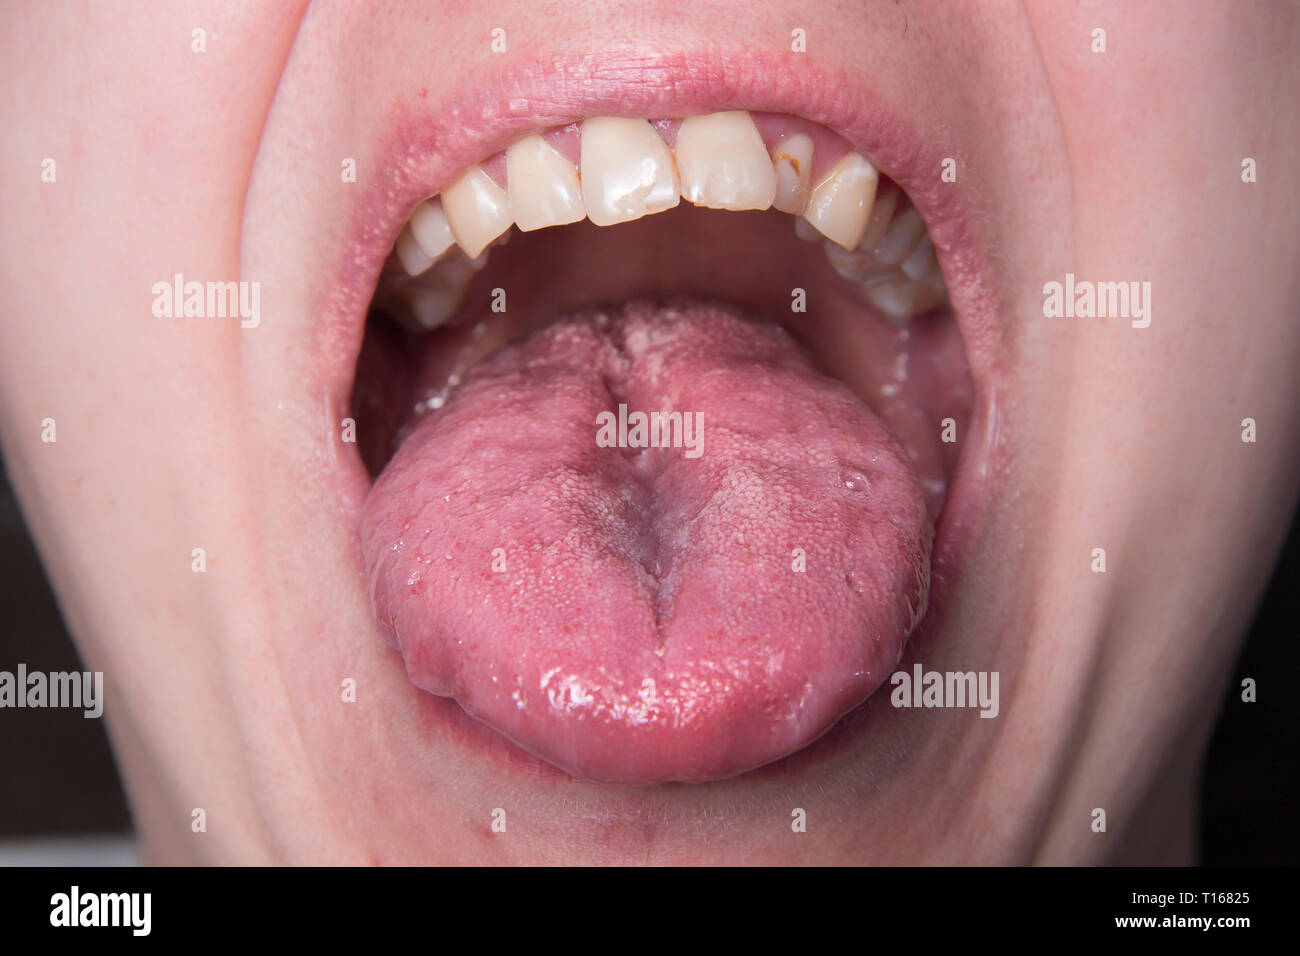 Male shows overgrowth candidiasis on his tongue Stock Photo